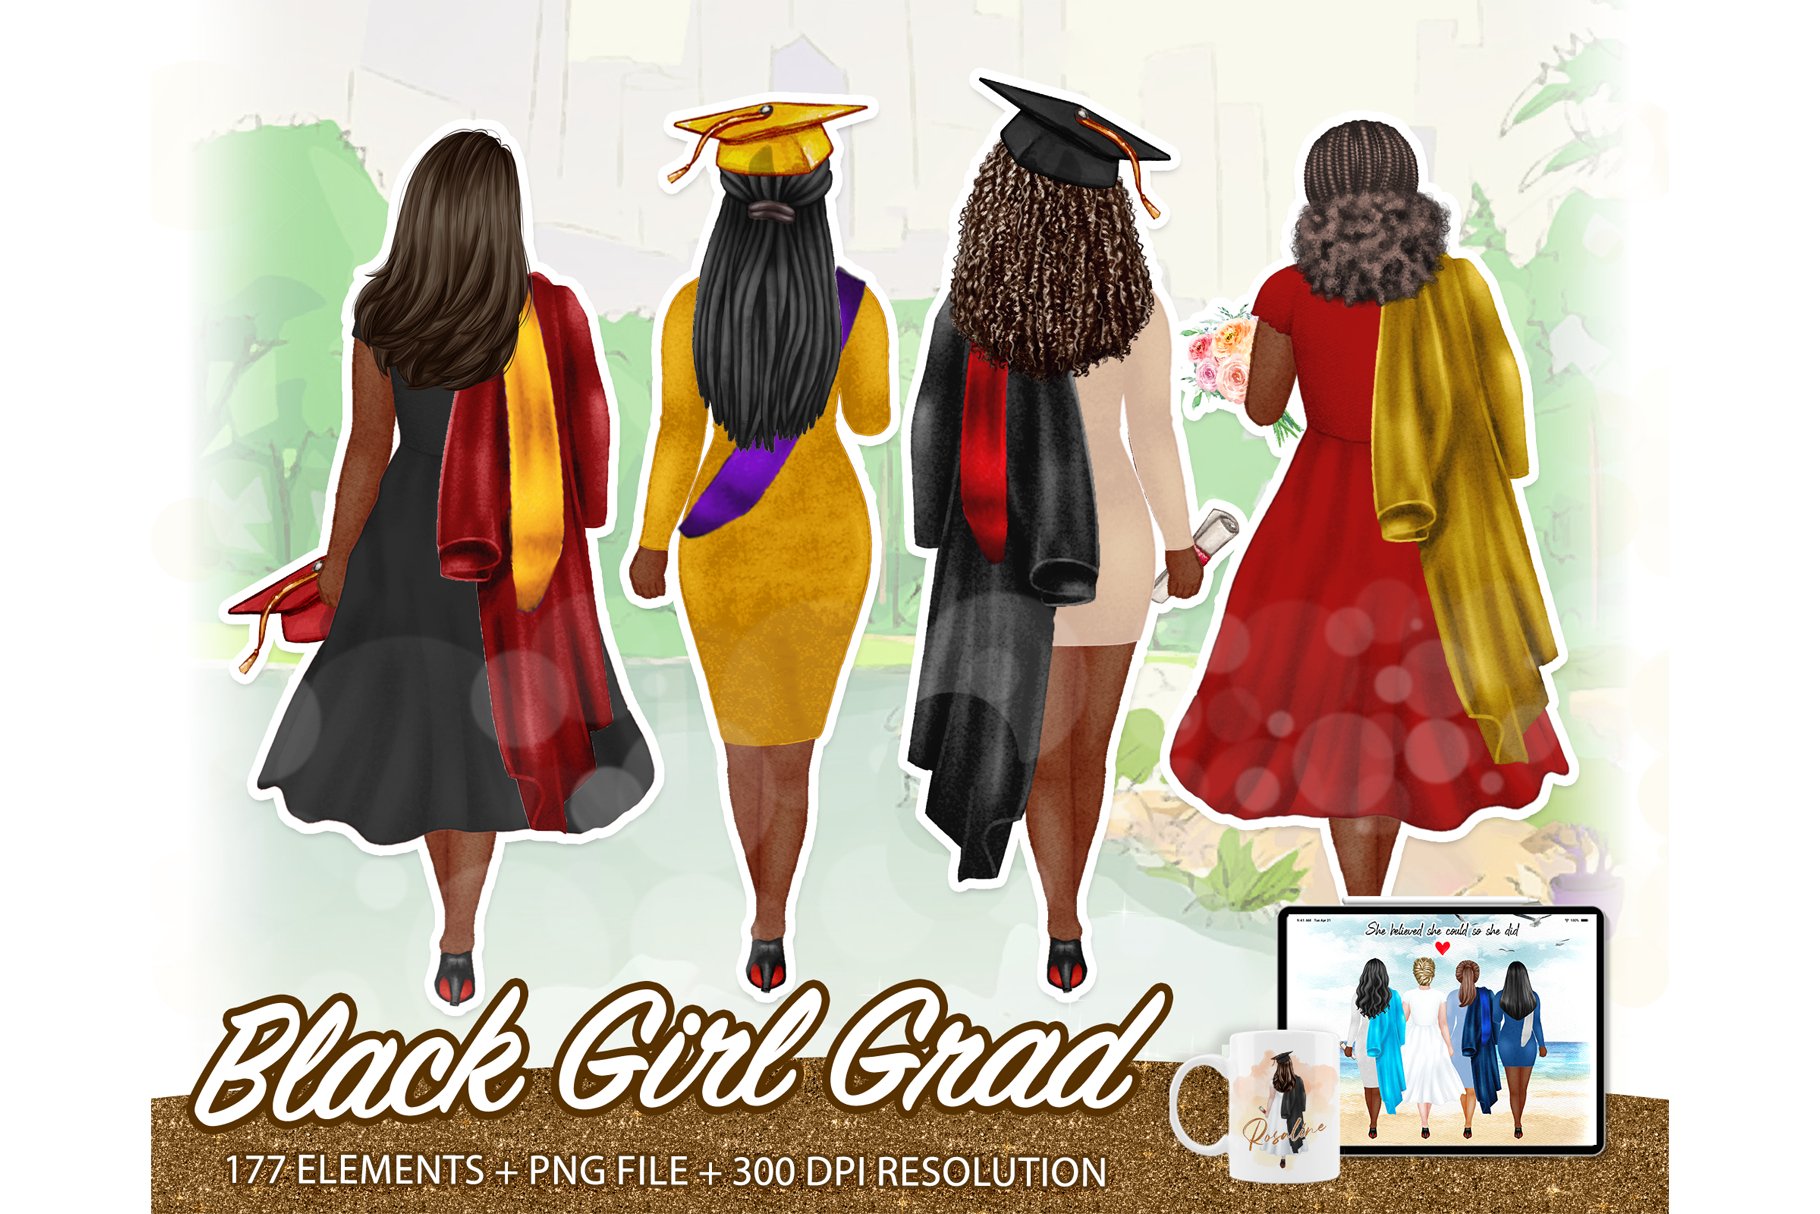 Graduation Clipart, 2022 cute graduate girls with cape and scroll